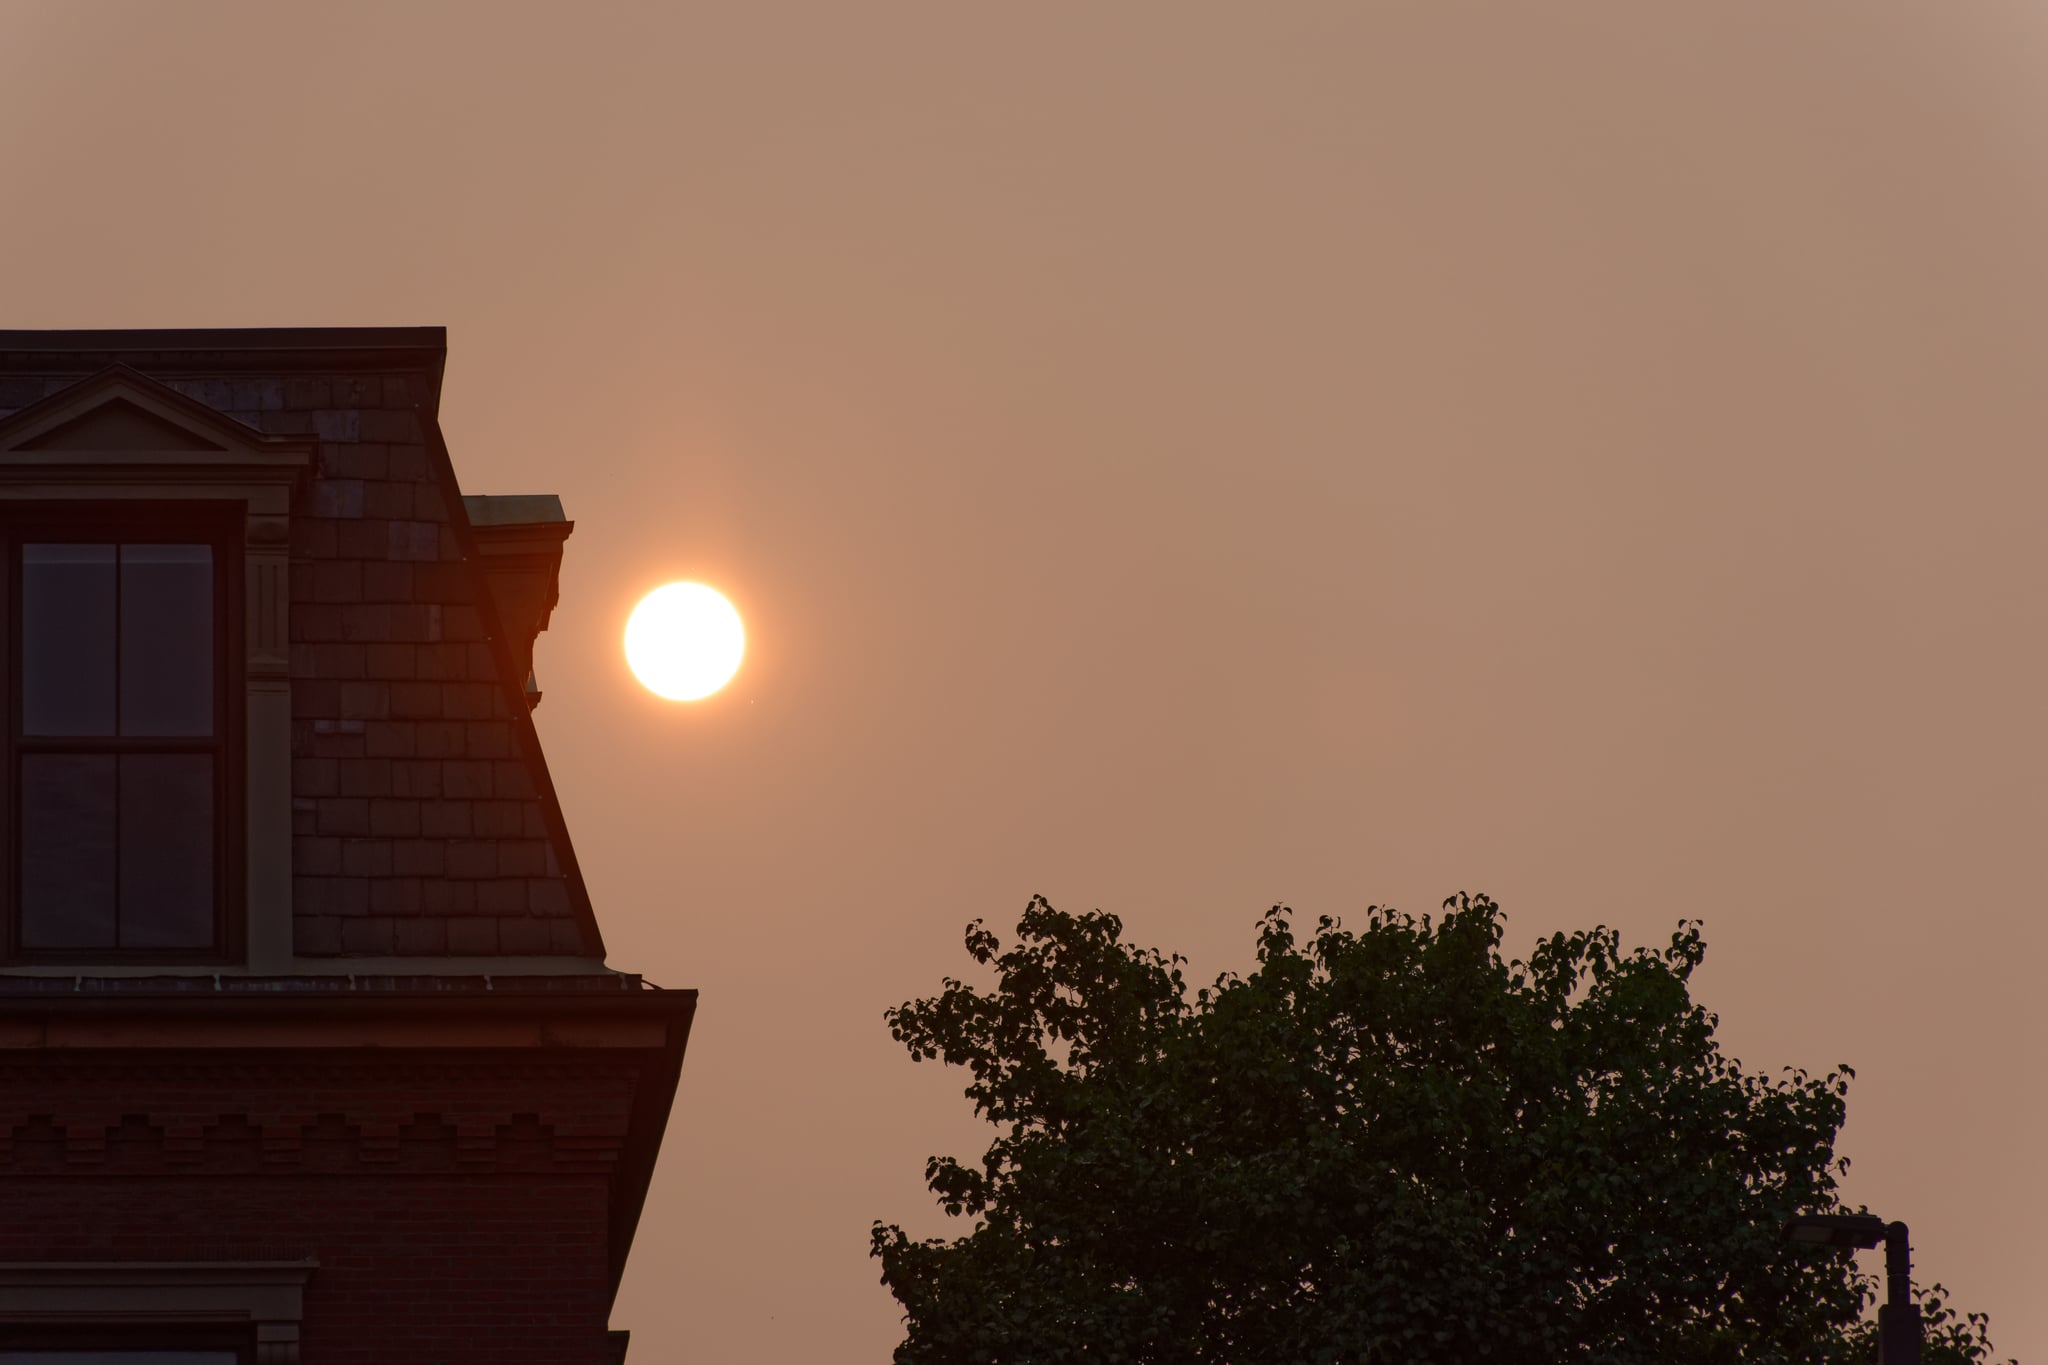 Smoke from the distant wildfires in the West turns Boston's sunrise red and hazy. The sun has cleared the horizon but is low enough to be partially framed by the silhouettes of a residential building and tree.